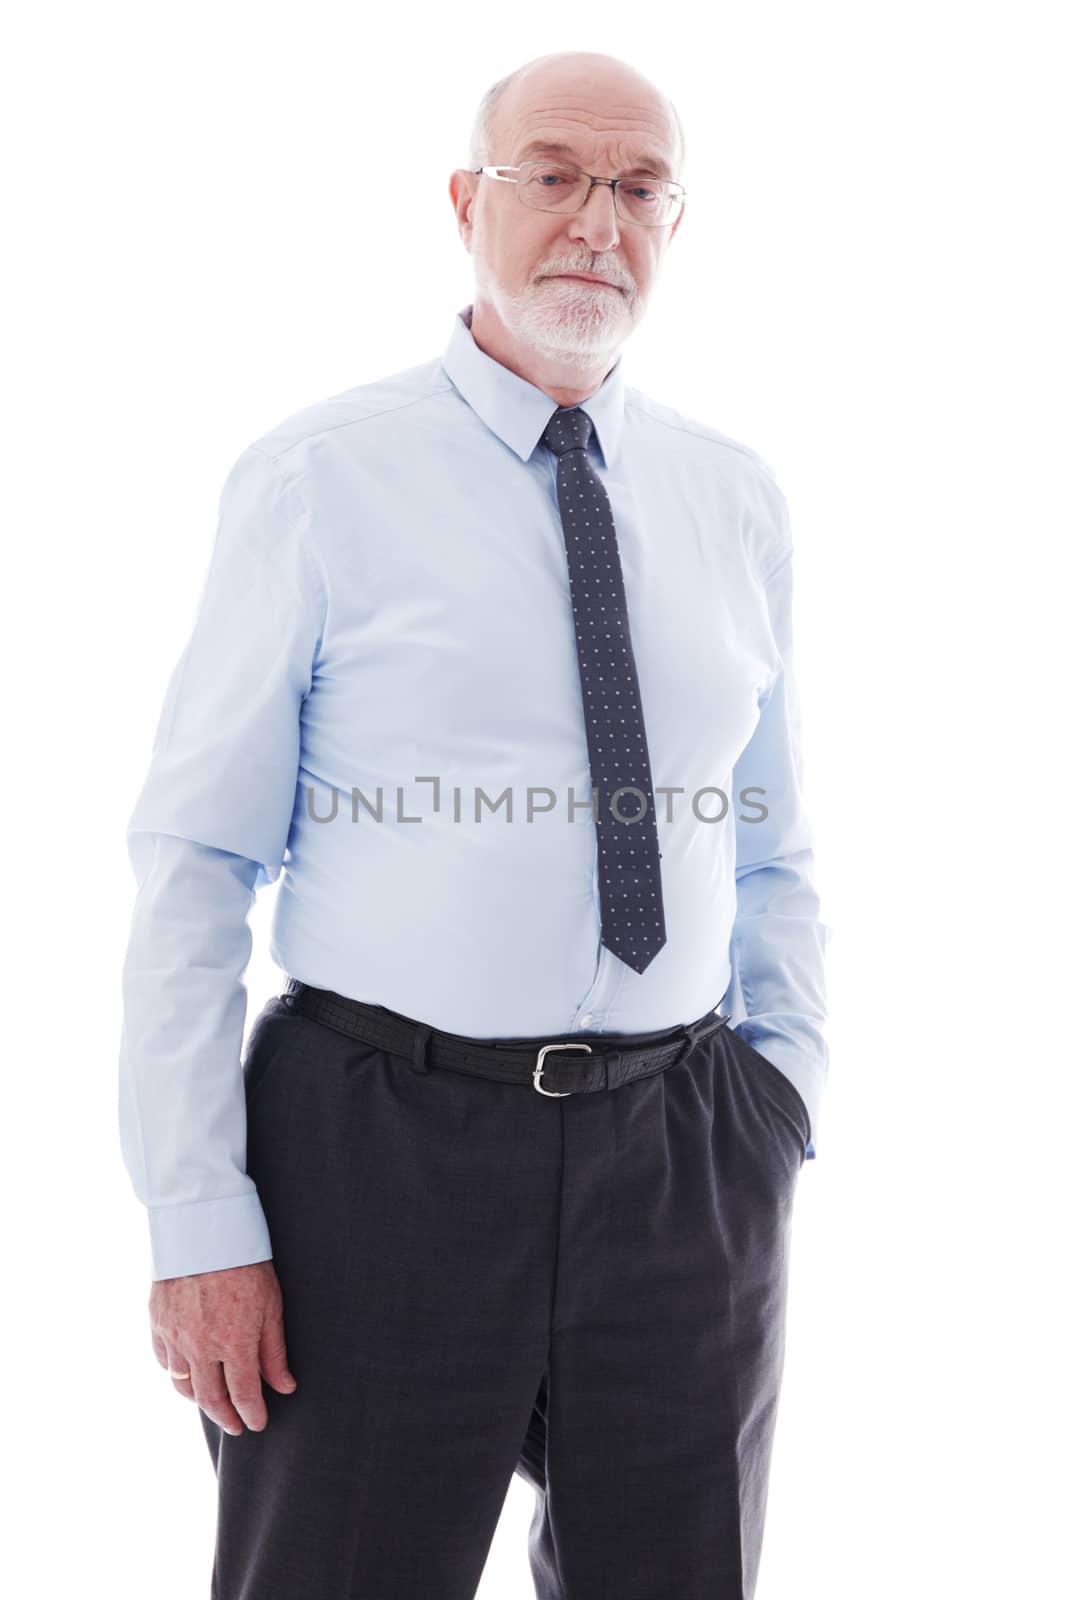 Portrait of senior business man by ALotOfPeople